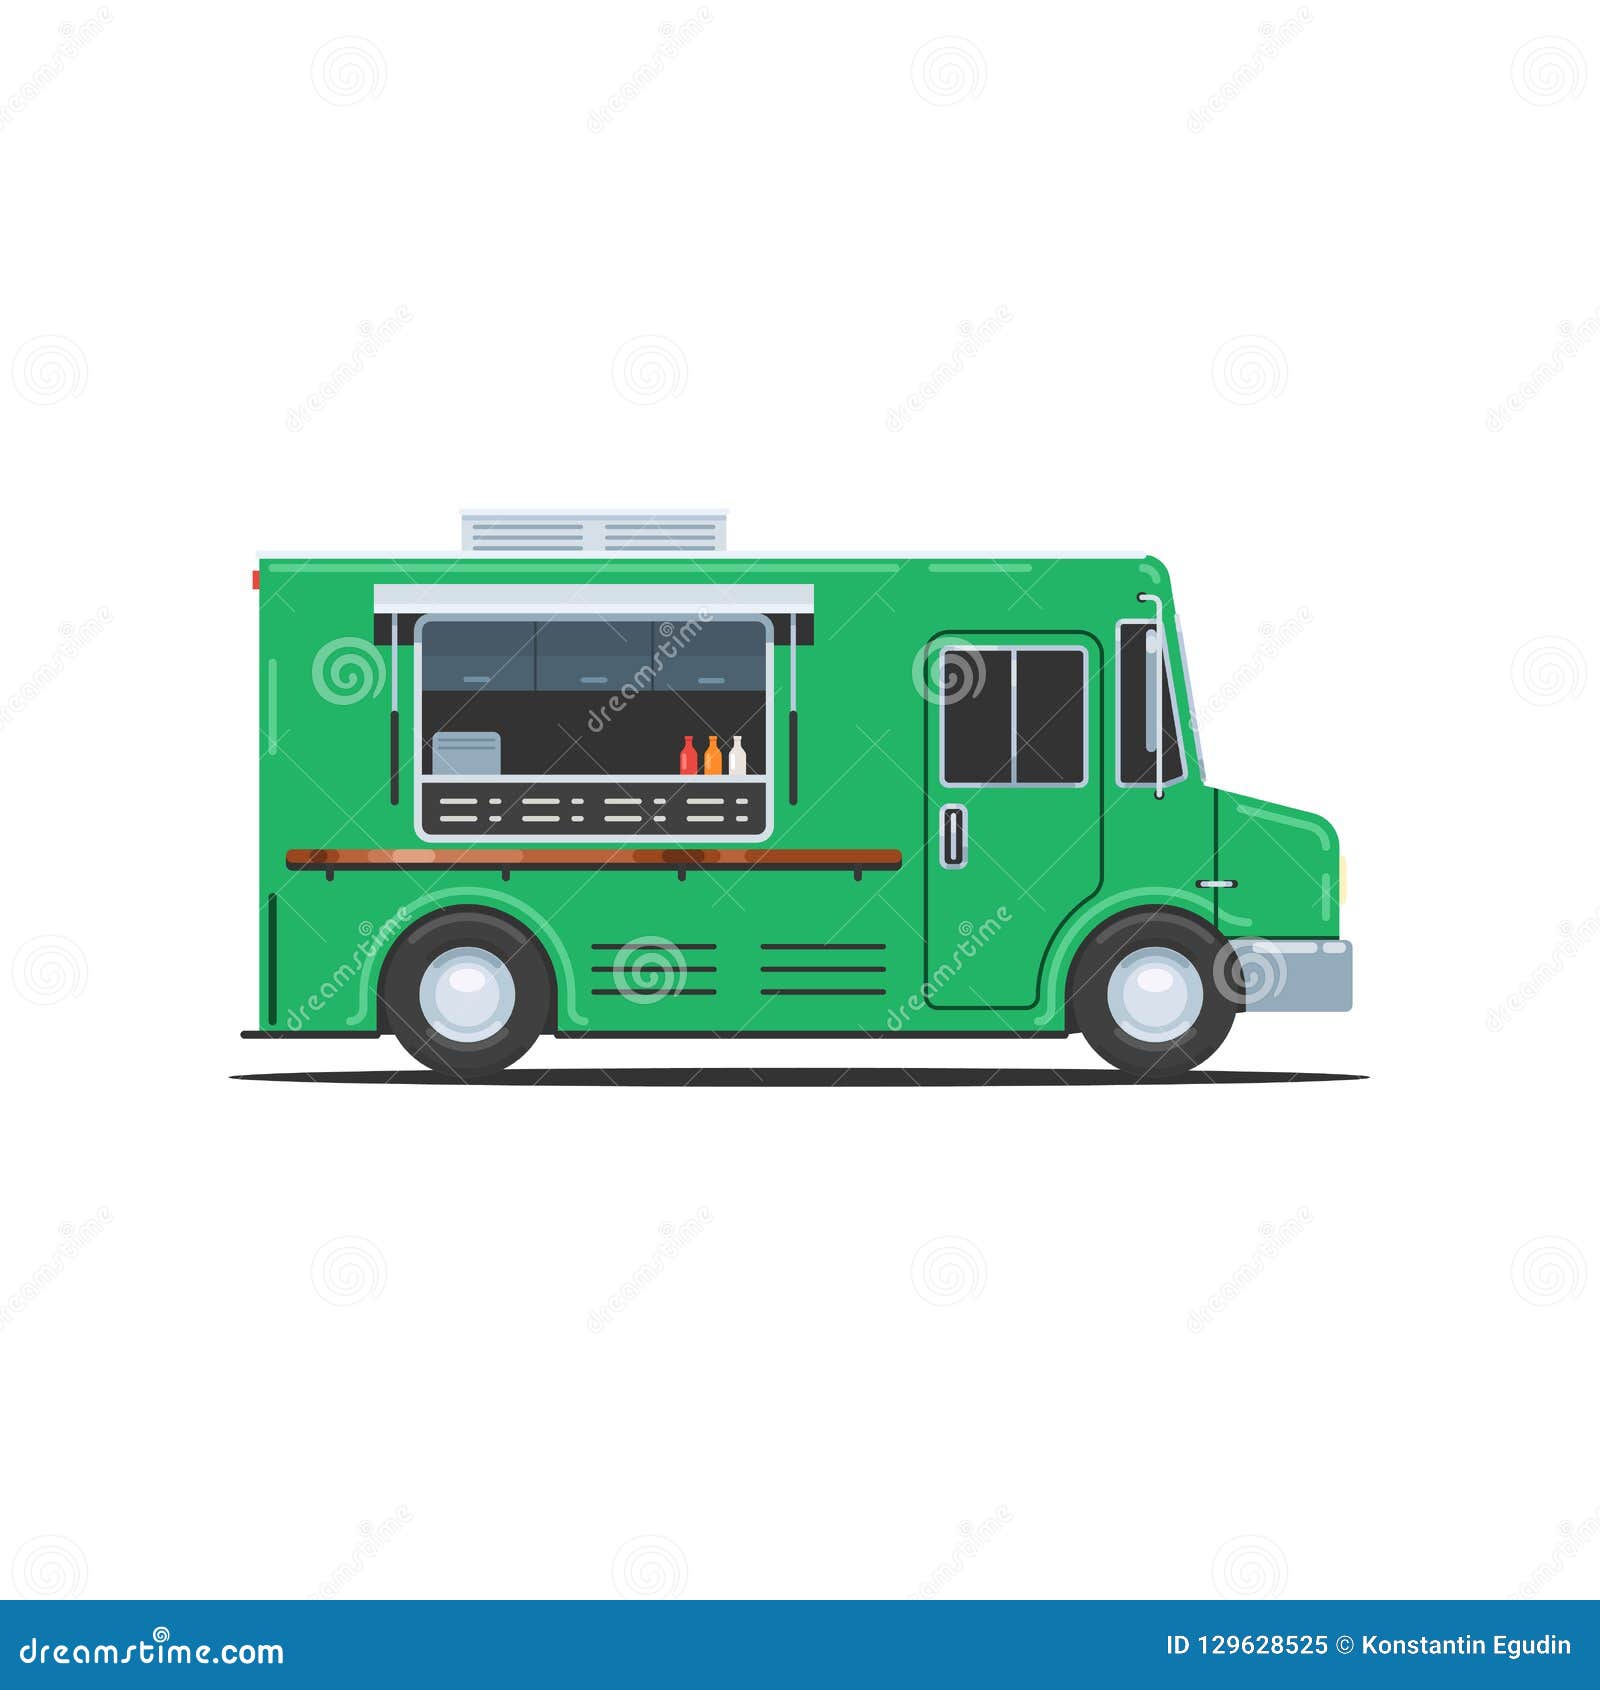 Green Food Truck Stock Vector Illustration Of Business 129628525